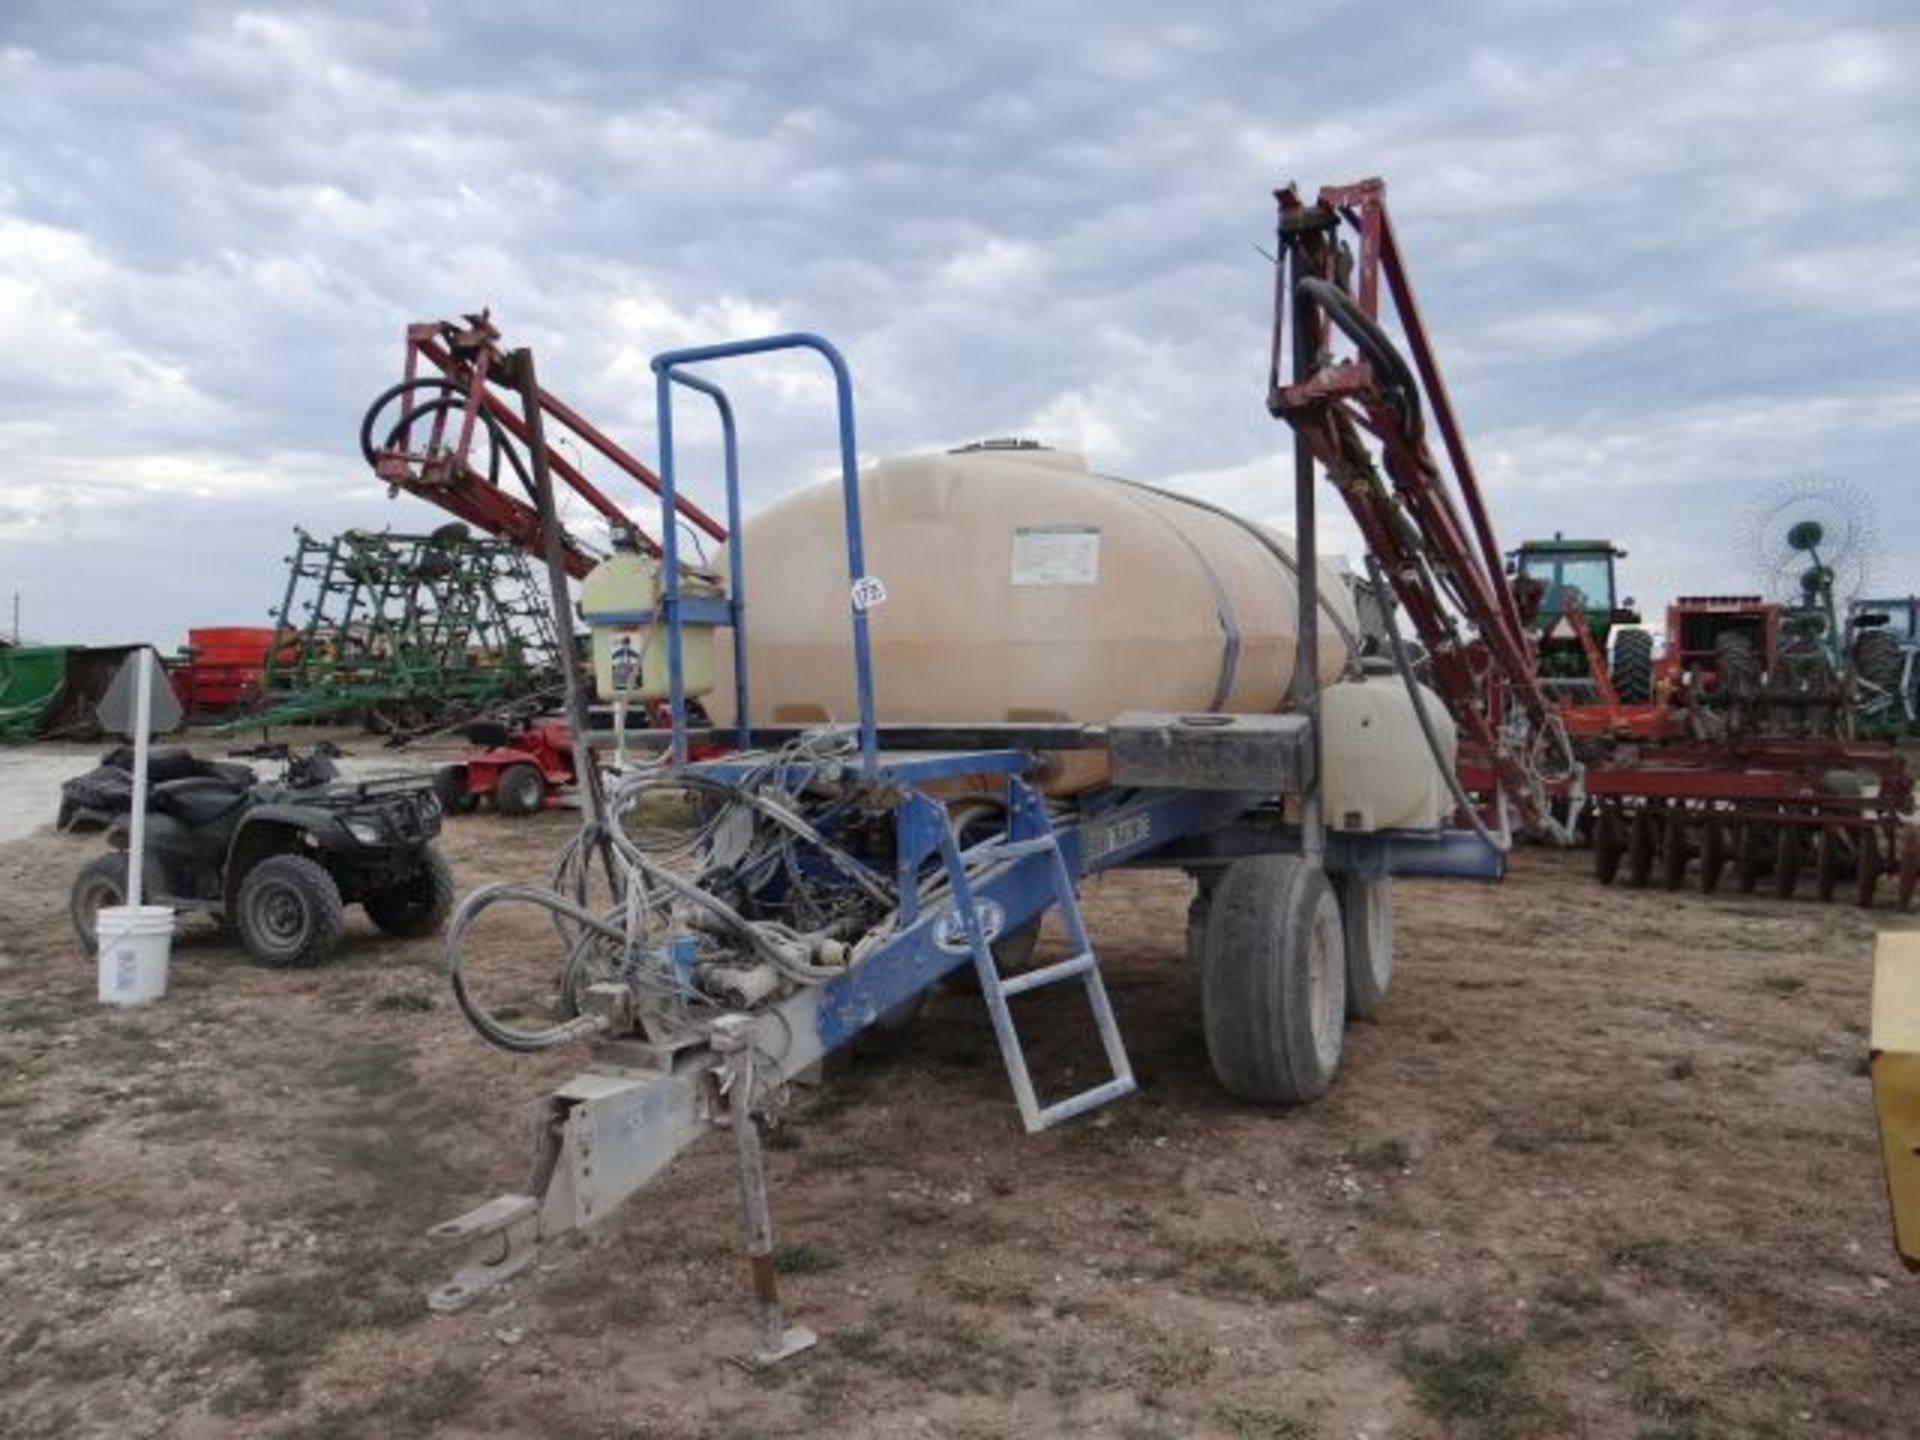 Broyhill Sprayer 60' Booms, 700 Gallon Tank, Raven 440 Controller and Manuals in the Shed